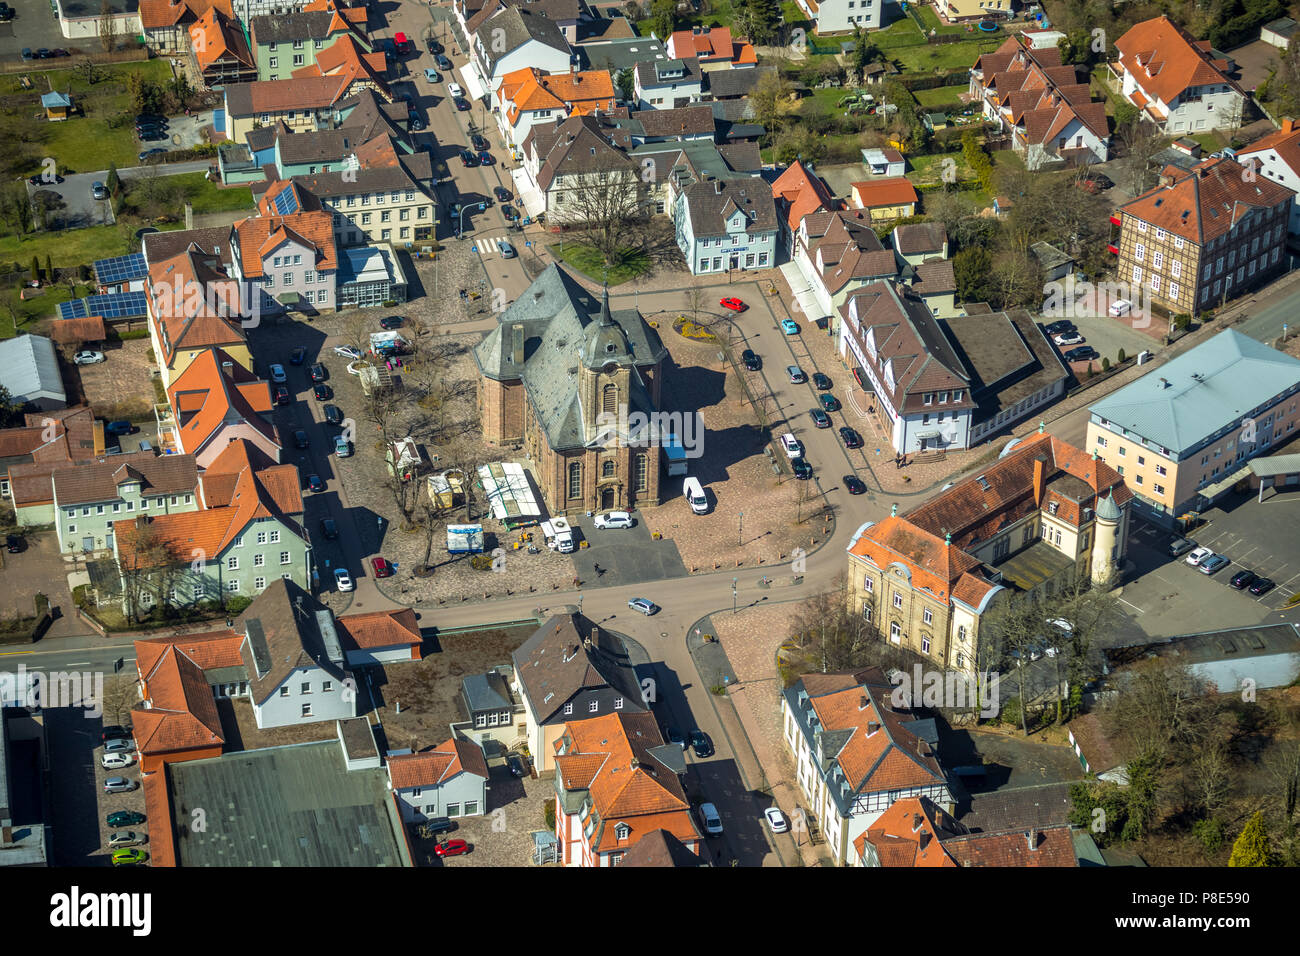 Aerial view, City church with church square and Bahnhofstraße, Bad Arolsen, Hesse, Germany Stock Photo